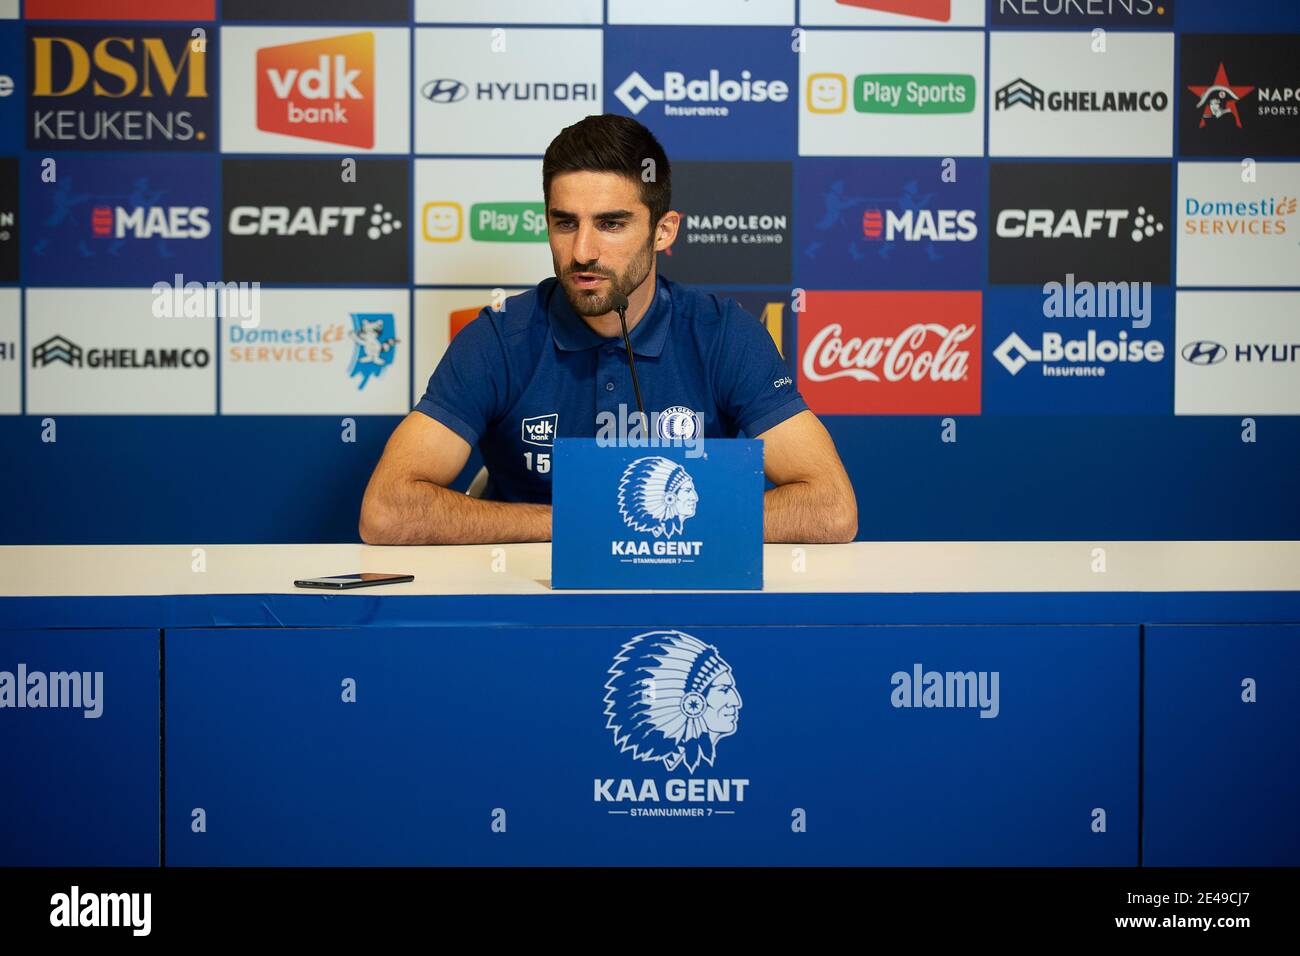 Gent's Milad Mohammadi pictured during a press conference of Belgian soccer team KAA Gent, Friday 22 January 2021 in Gent, ahead of day 21 of the 'Jup Stock Photo